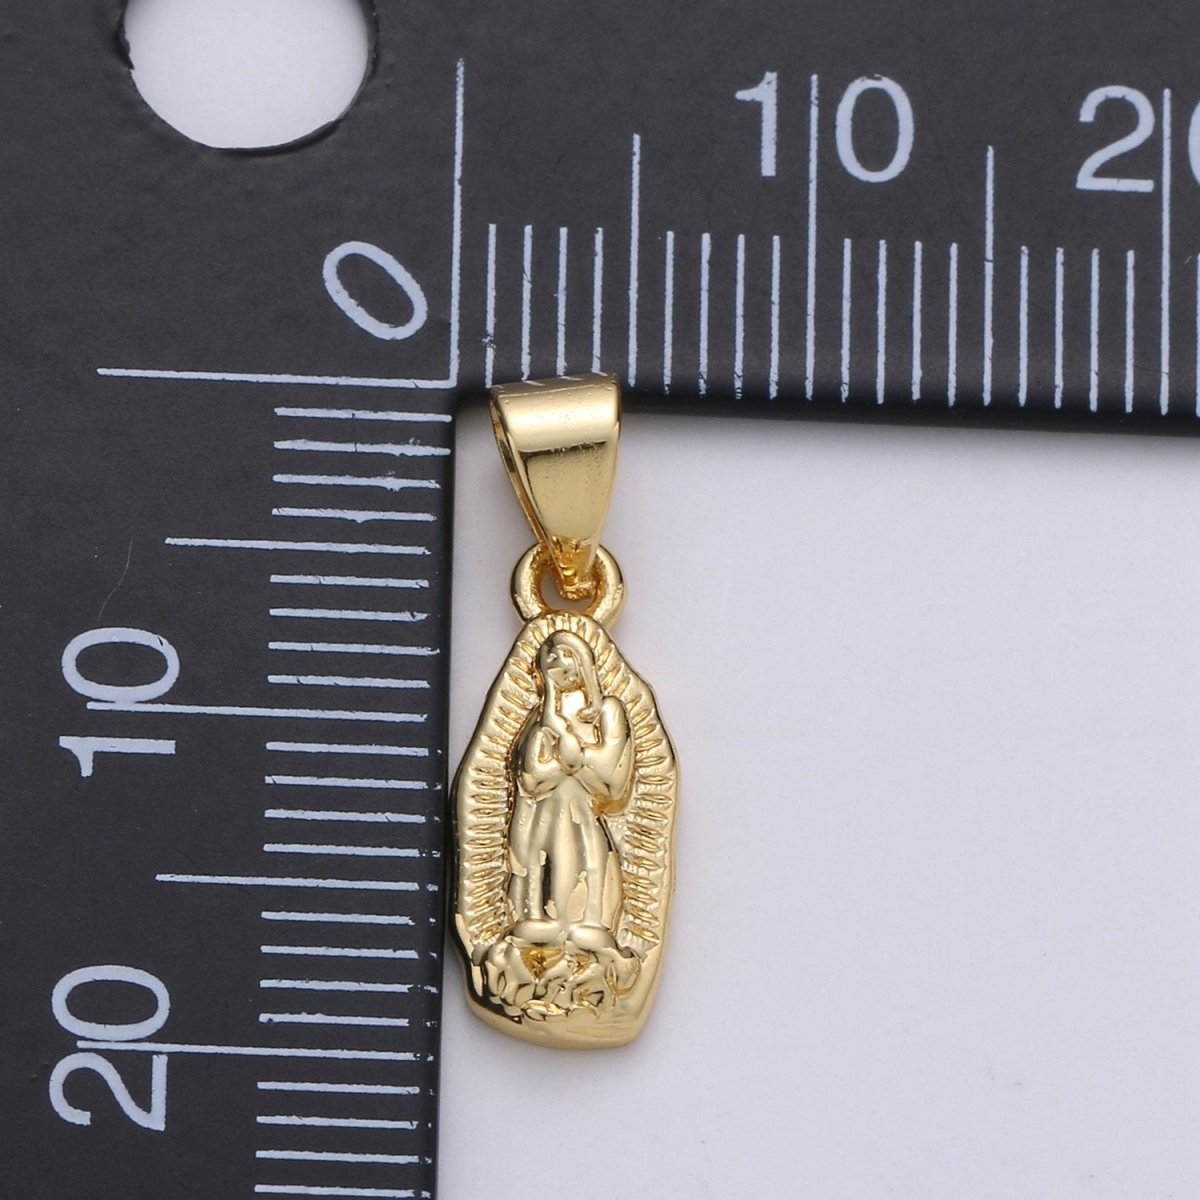 Vintage Mary Charm Necklace 14K Gold Filled Holy Mary Pendant Necklace, Our Lady of Guadalupe Pendant Necklace For Religious Jewelry Making J-006 - DLUXCA